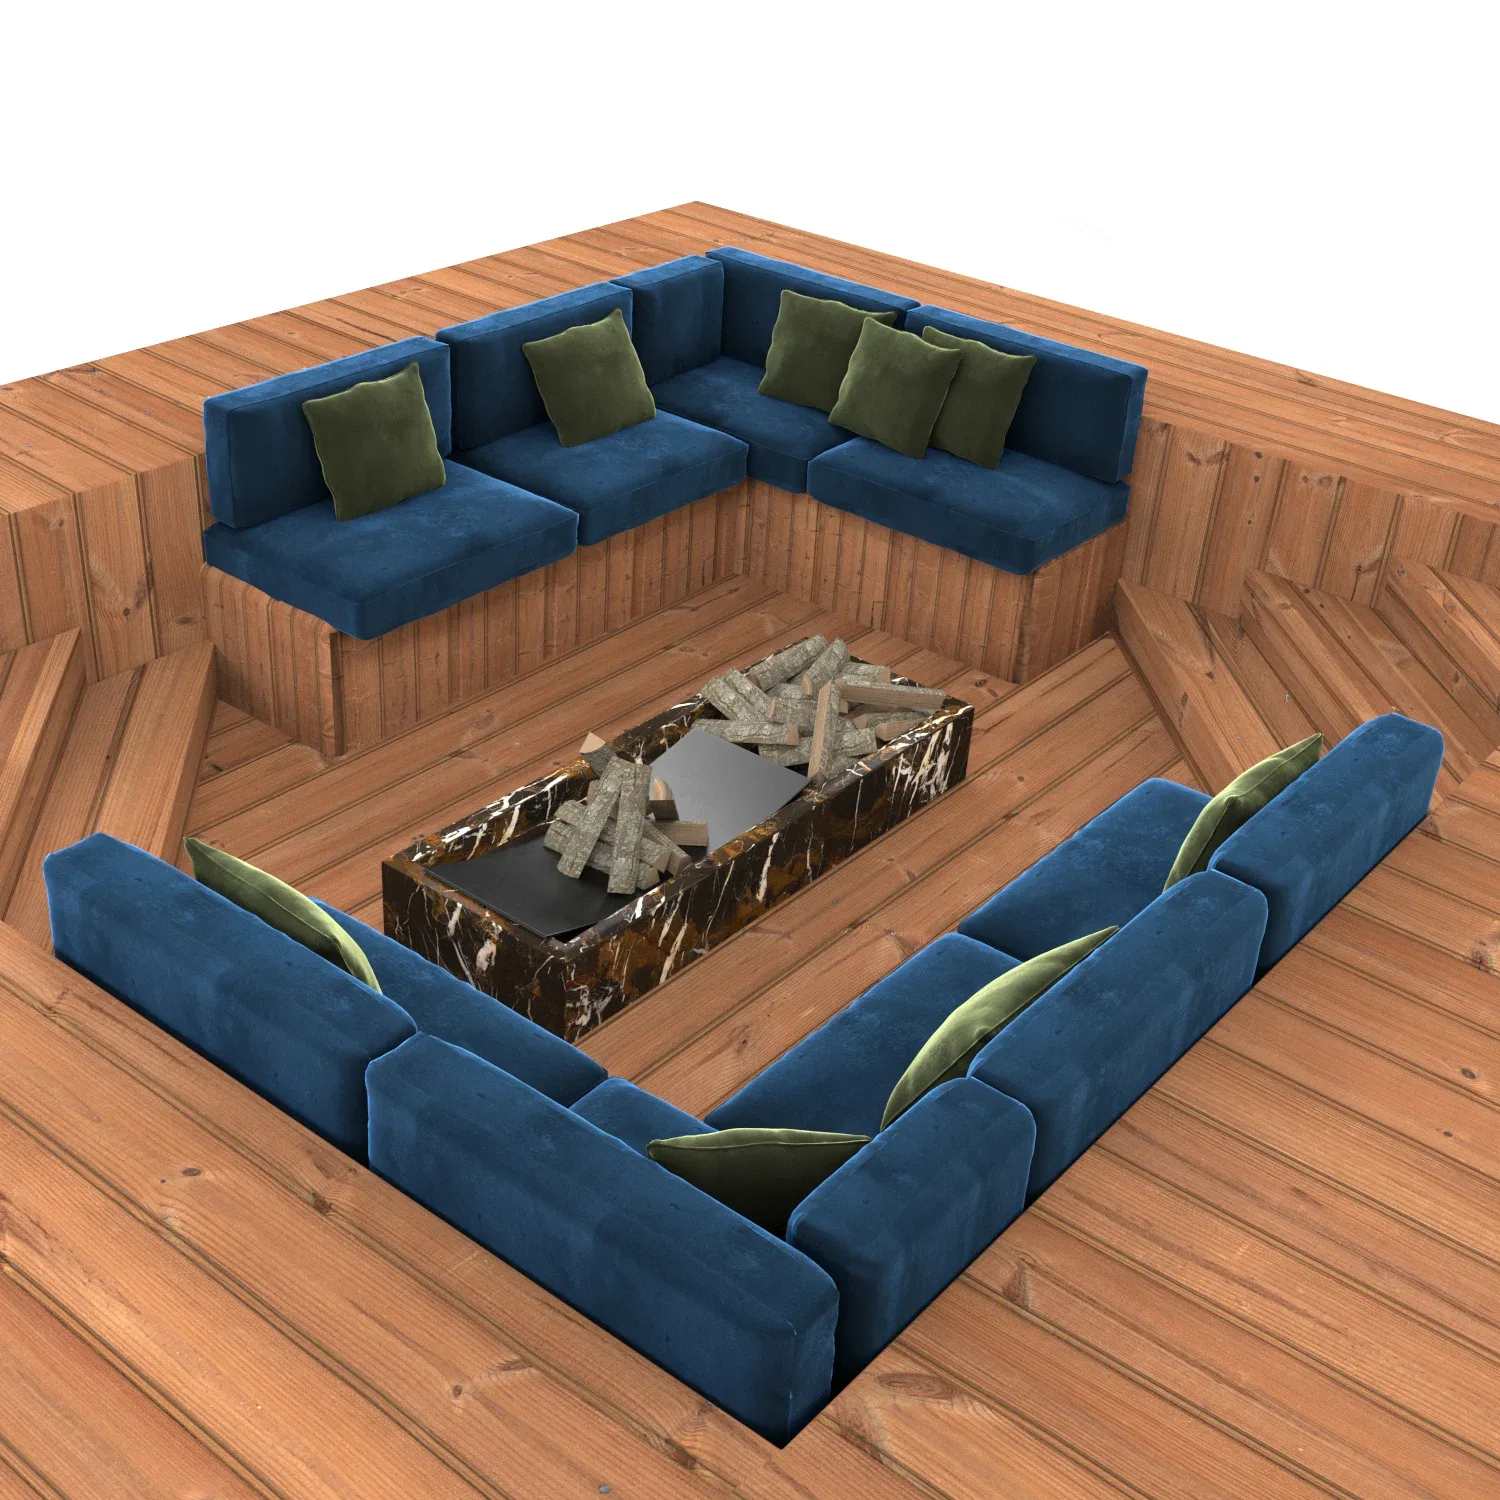 Sofa for Overflow Swimming Pool